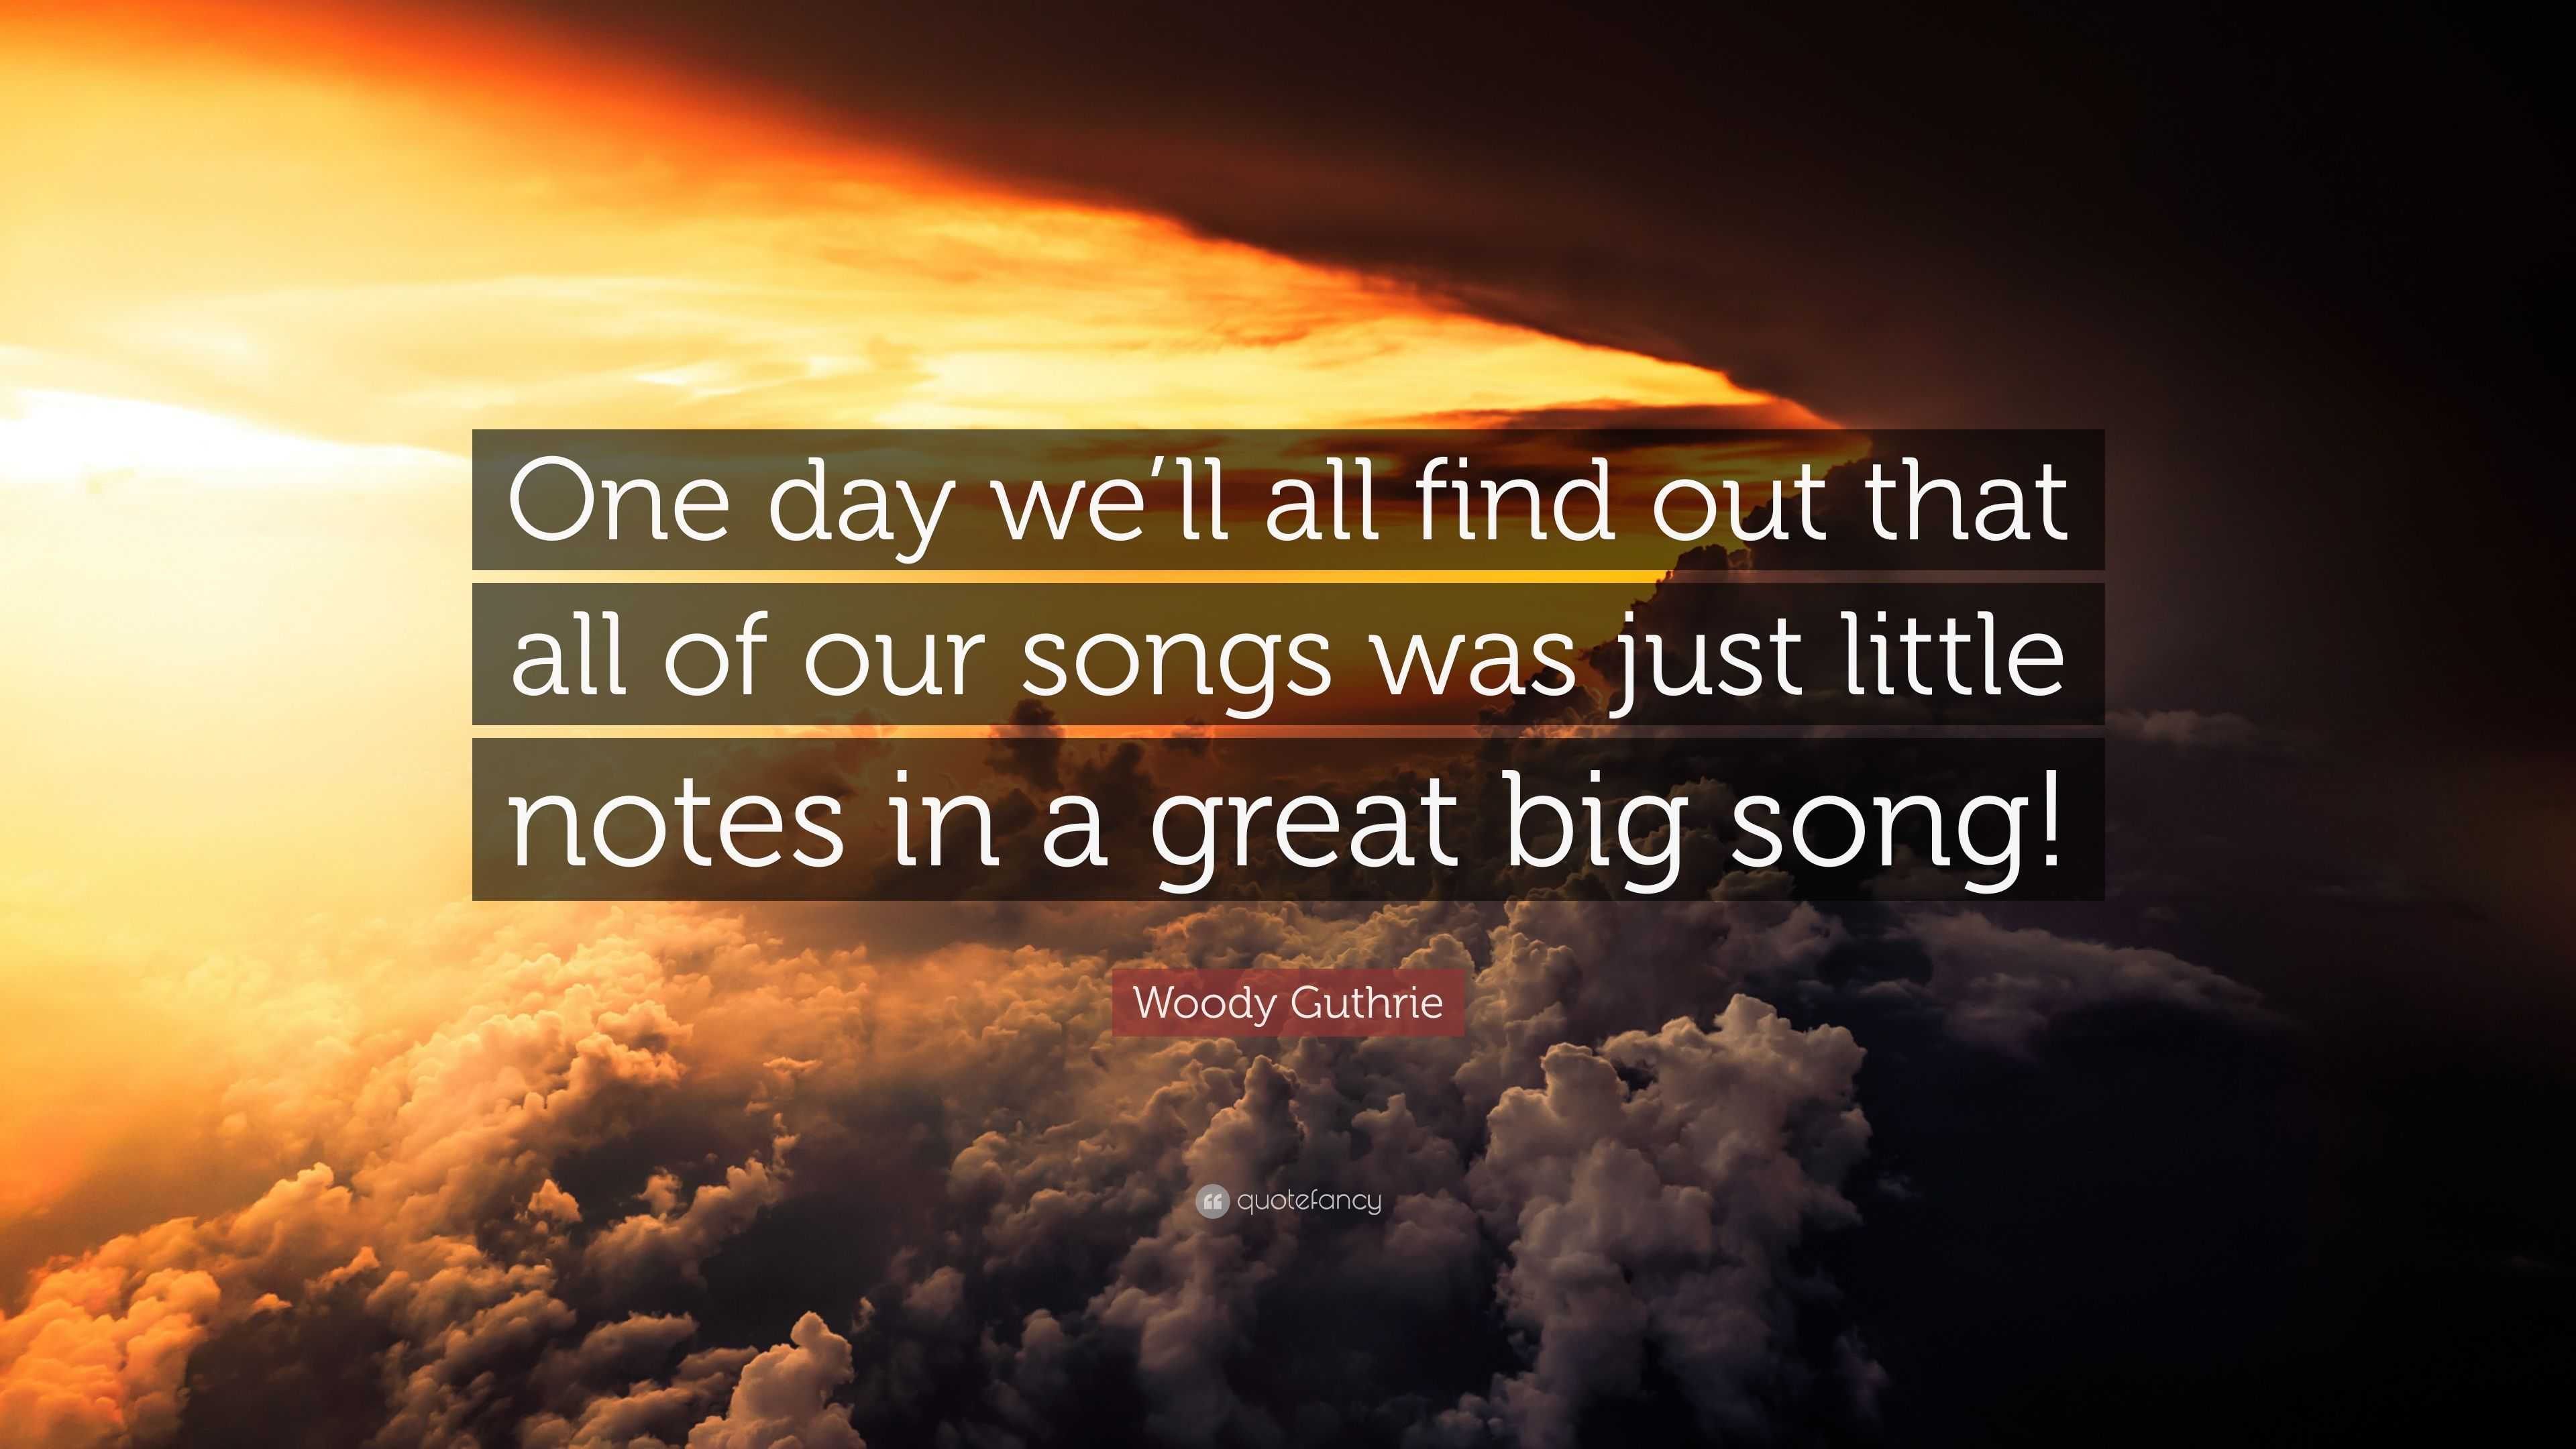 https://quotefancy.com/media/wallpaper/3840x2160/4383060-Woody-Guthrie-Quote-One-day-we-ll-all-find-out-that-all-of-our.jpg